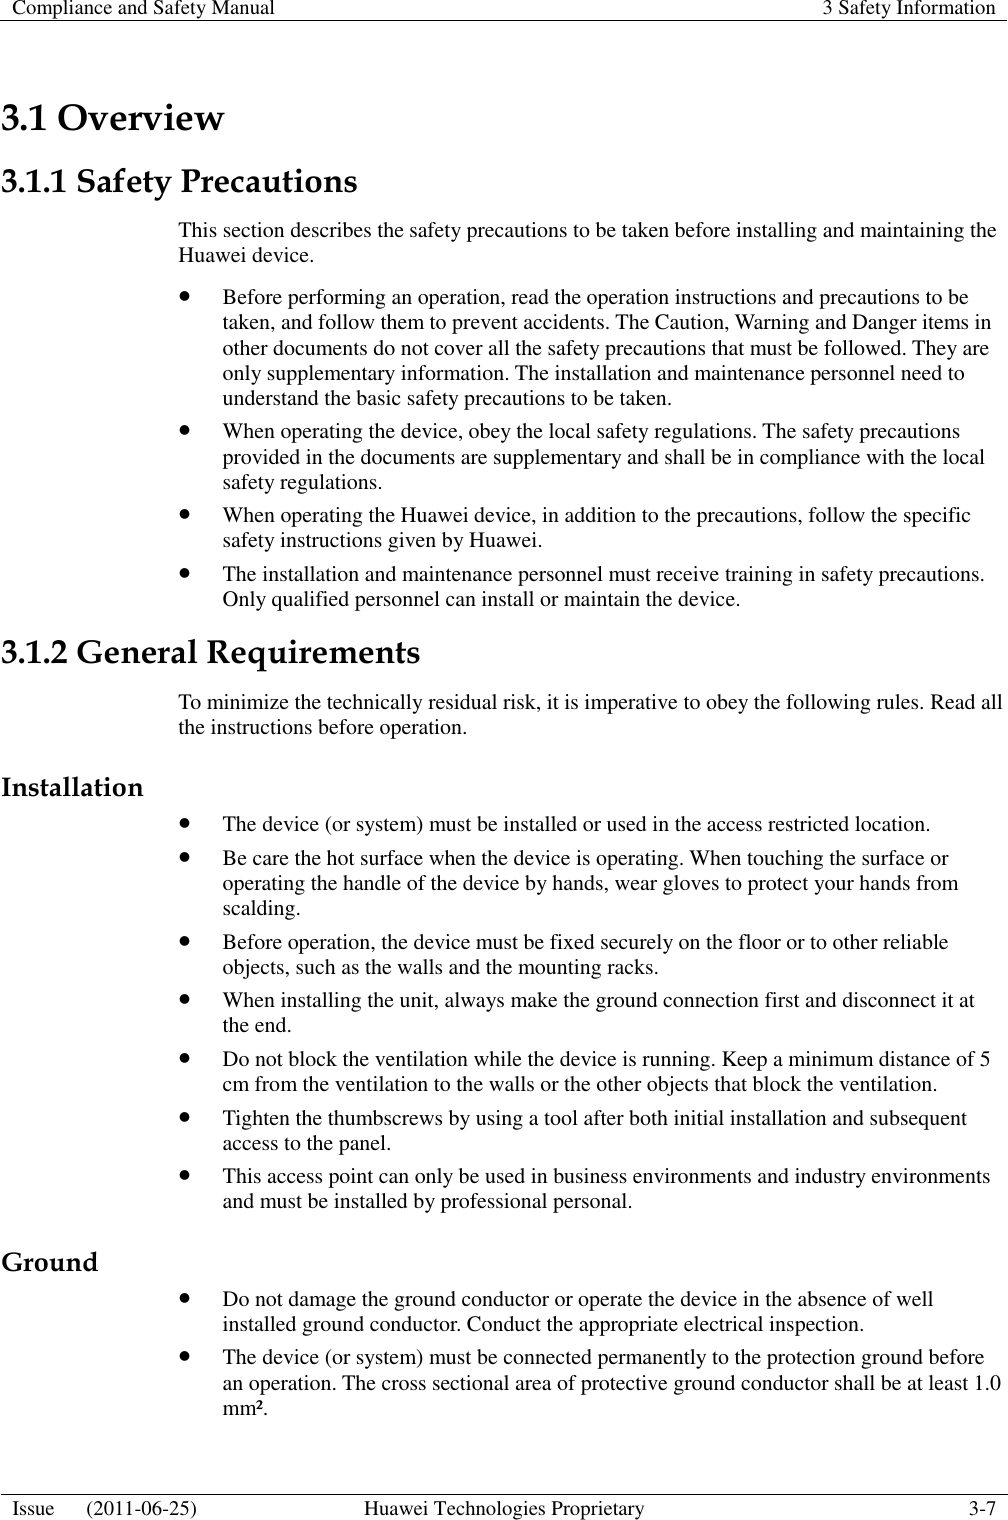 Compliance and Safety Manual 3 Safety Information  Issue      (2011-06-25) Huawei Technologies Proprietary 3-7  3.1 Overview 3.1.1 Safety Precautions This section describes the safety precautions to be taken before installing and maintaining the Huawei device.  Before performing an operation, read the operation instructions and precautions to be taken, and follow them to prevent accidents. The Caution, Warning and Danger items in other documents do not cover all the safety precautions that must be followed. They are only supplementary information. The installation and maintenance personnel need to understand the basic safety precautions to be taken.  When operating the device, obey the local safety regulations. The safety precautions provided in the documents are supplementary and shall be in compliance with the local safety regulations.  When operating the Huawei device, in addition to the precautions, follow the specific safety instructions given by Huawei.  The installation and maintenance personnel must receive training in safety precautions. Only qualified personnel can install or maintain the device. 3.1.2 General Requirements To minimize the technically residual risk, it is imperative to obey the following rules. Read all the instructions before operation. Installation  The device (or system) must be installed or used in the access restricted location.  Be care the hot surface when the device is operating. When touching the surface or operating the handle of the device by hands, wear gloves to protect your hands from scalding.  Before operation, the device must be fixed securely on the floor or to other reliable objects, such as the walls and the mounting racks.  When installing the unit, always make the ground connection first and disconnect it at the end.  Do not block the ventilation while the device is running. Keep a minimum distance of 5 cm from the ventilation to the walls or the other objects that block the ventilation.  Tighten the thumbscrews by using a tool after both initial installation and subsequent access to the panel.  This access point can only be used in business environments and industry environments and must be installed by professional personal. Ground  Do not damage the ground conductor or operate the device in the absence of well installed ground conductor. Conduct the appropriate electrical inspection.  The device (or system) must be connected permanently to the protection ground before an operation. The cross sectional area of protective ground conductor shall be at least 1.0 mm². 